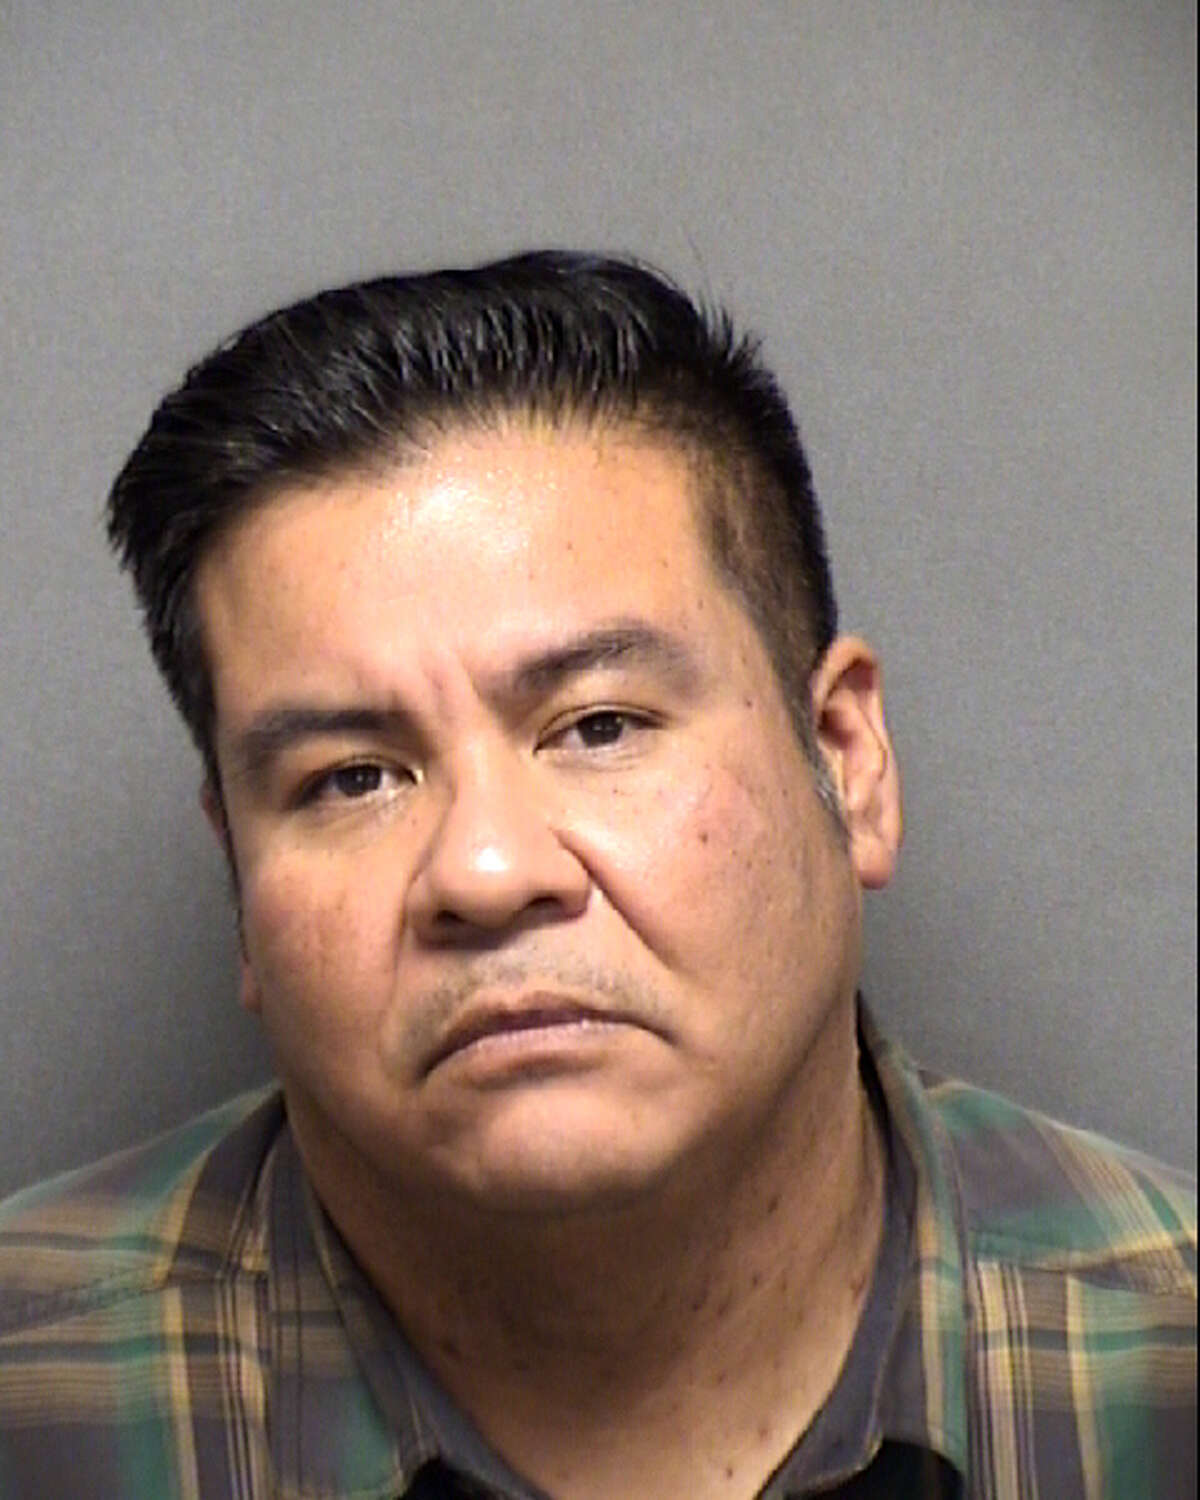 Francisco Rangel is charged with murder after police arrested him in connection with the 1996 killing of 18-year-old Joseph Johnson.